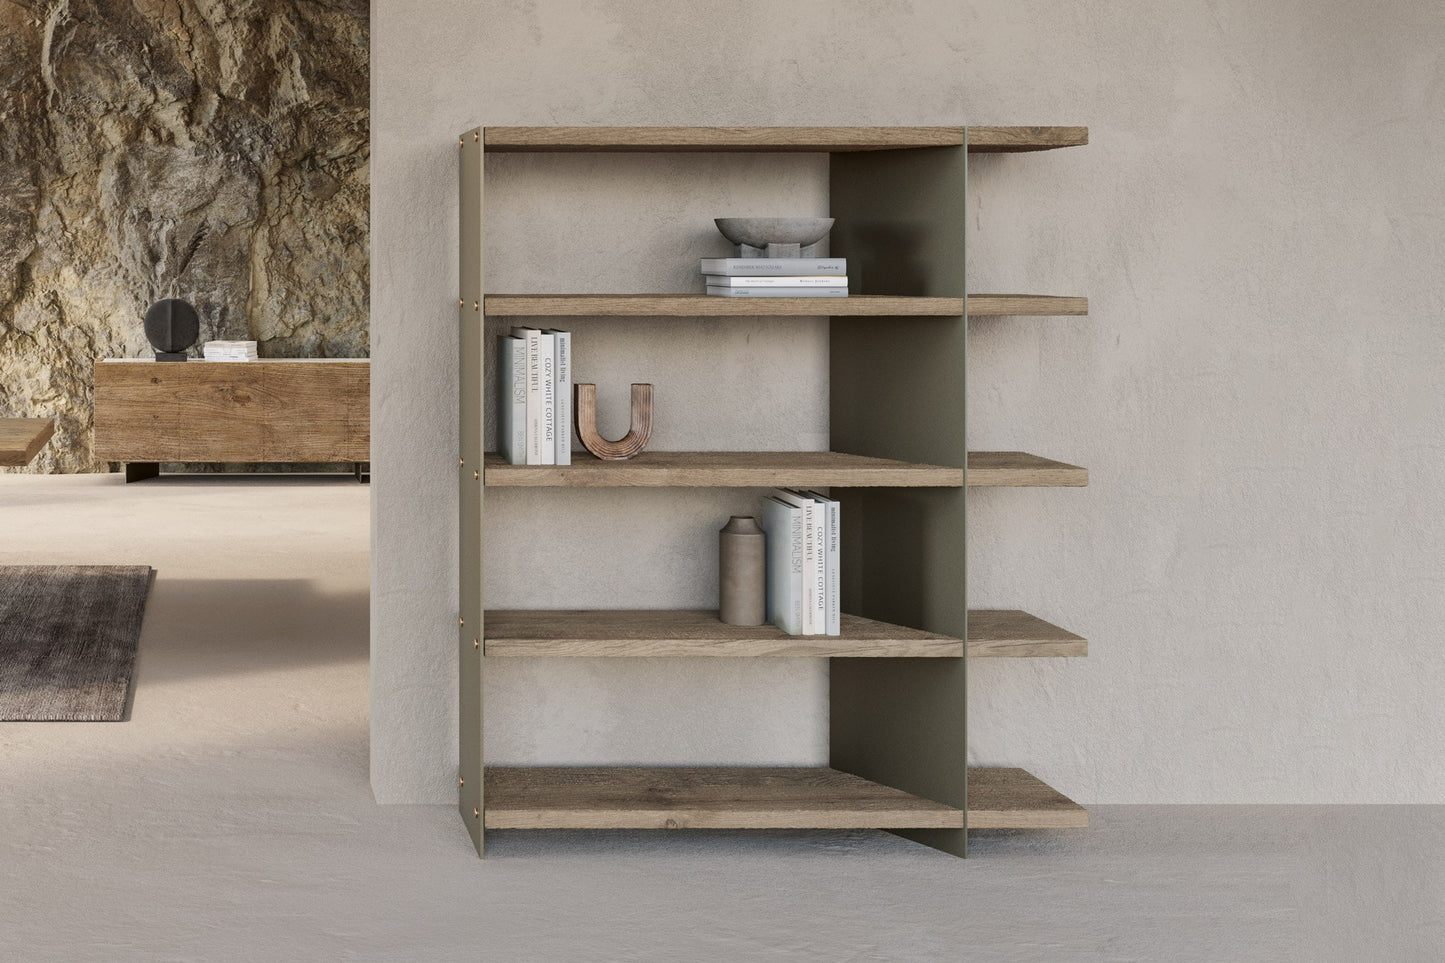 GRAFT METAL I bookcase by NATUREDESIGN